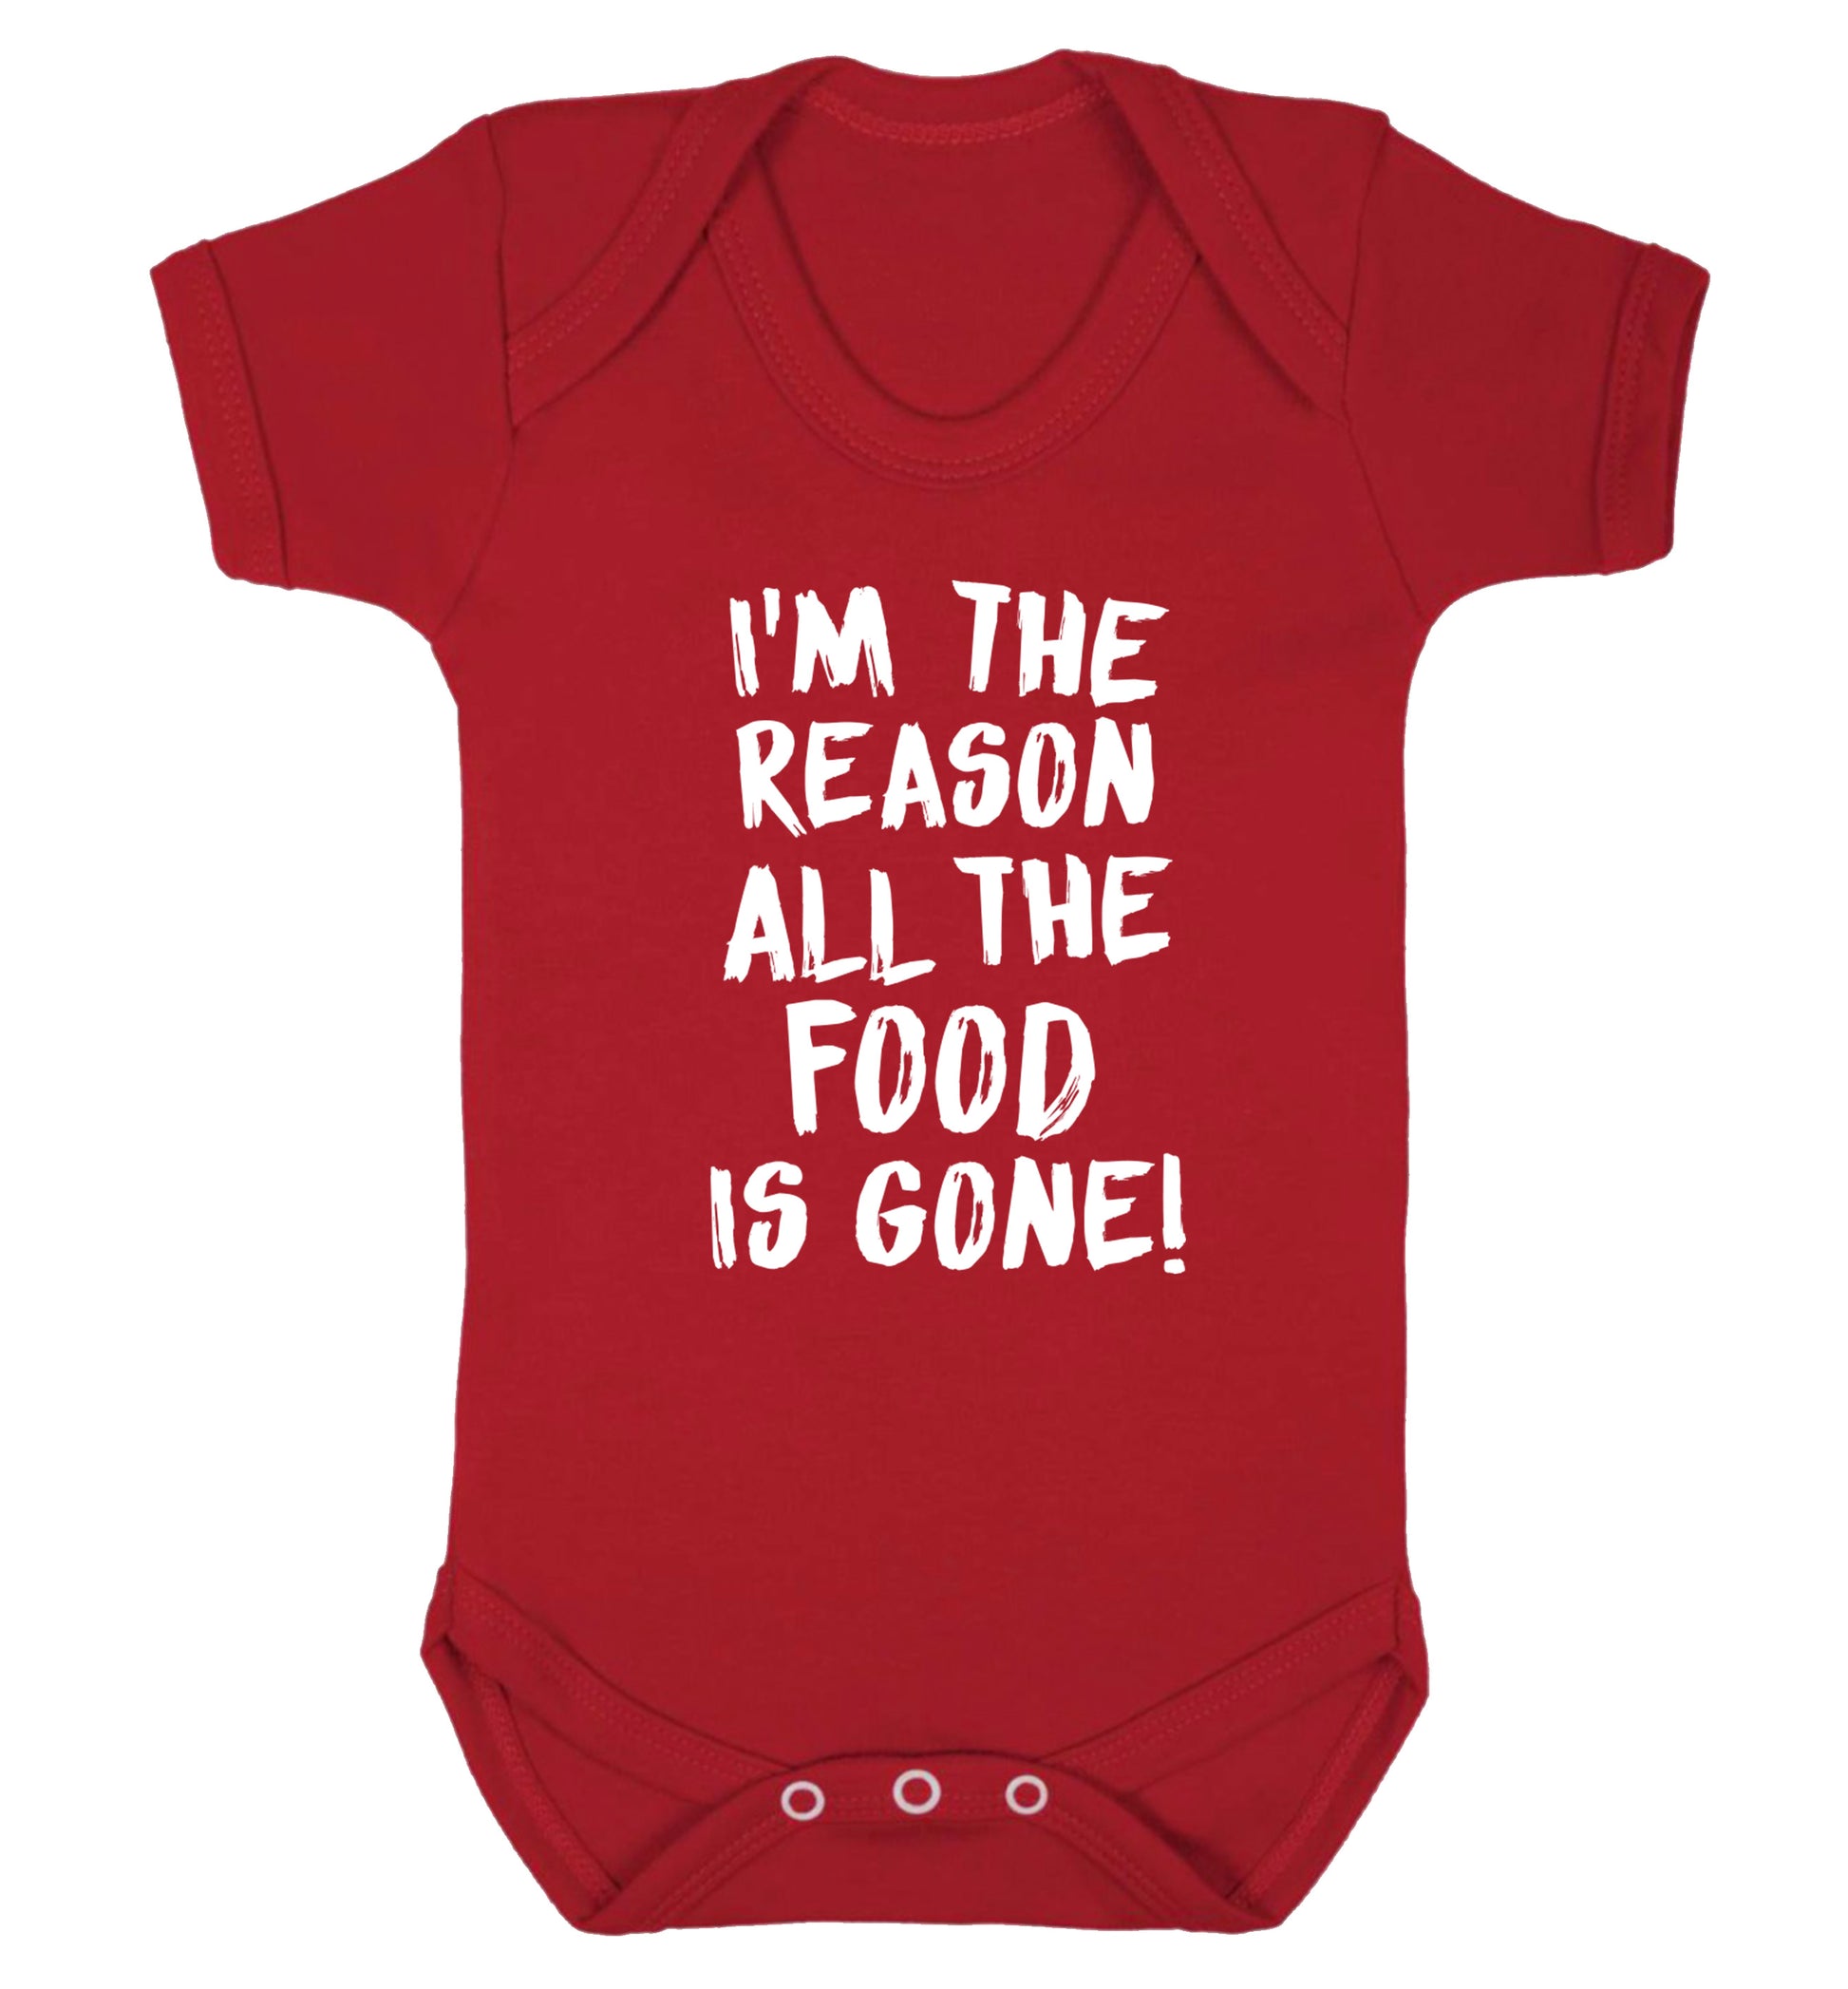 I'm the reason why all the food is gone Baby Vest red 18-24 months